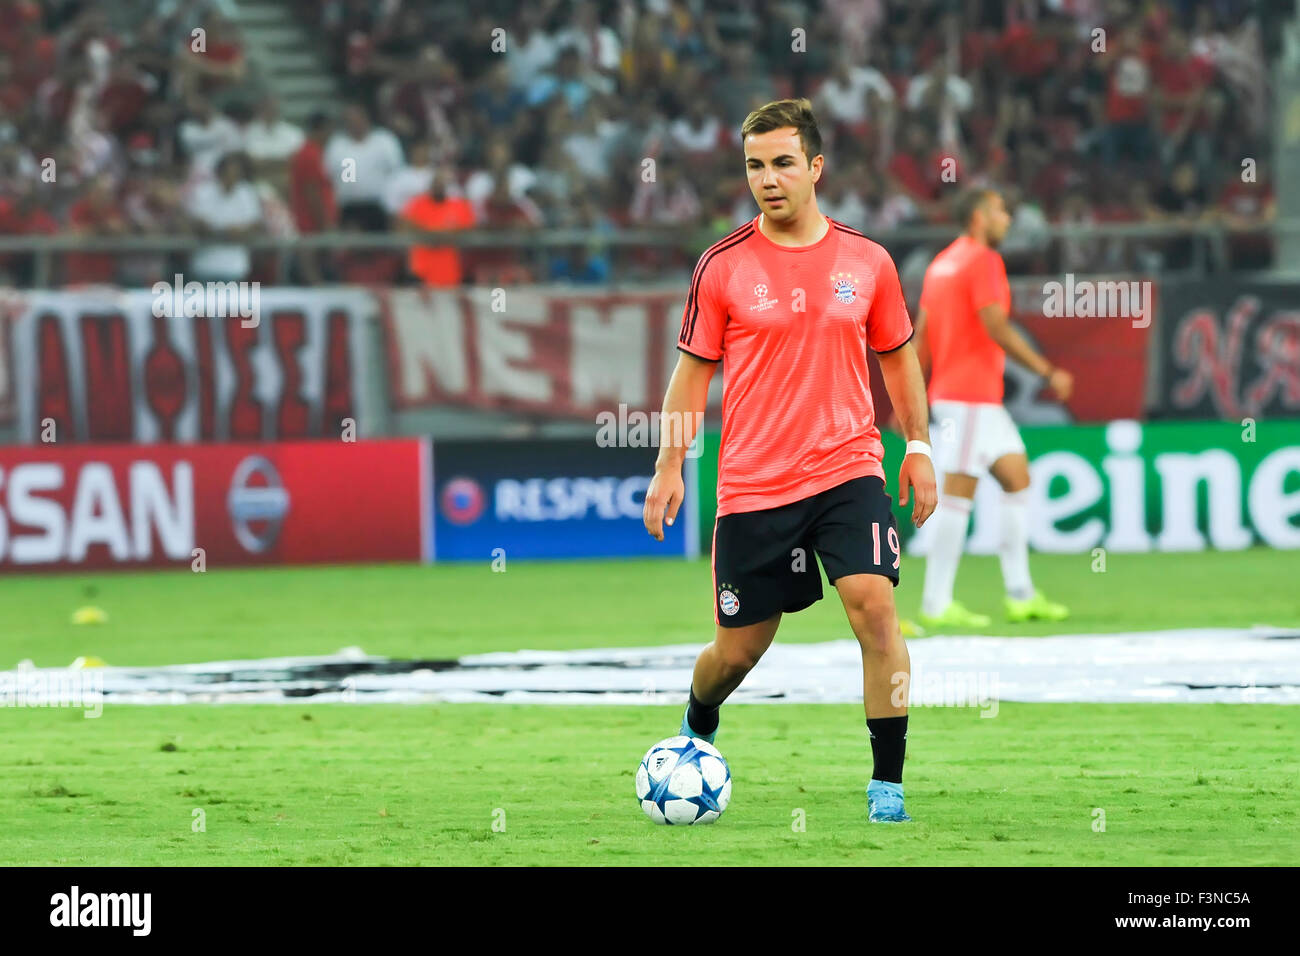 Athens, Greece- September 16, 2015: Mario Gotze before the beginning of the UEFA Champions League game between Olympiacos and Ba Stock Photo